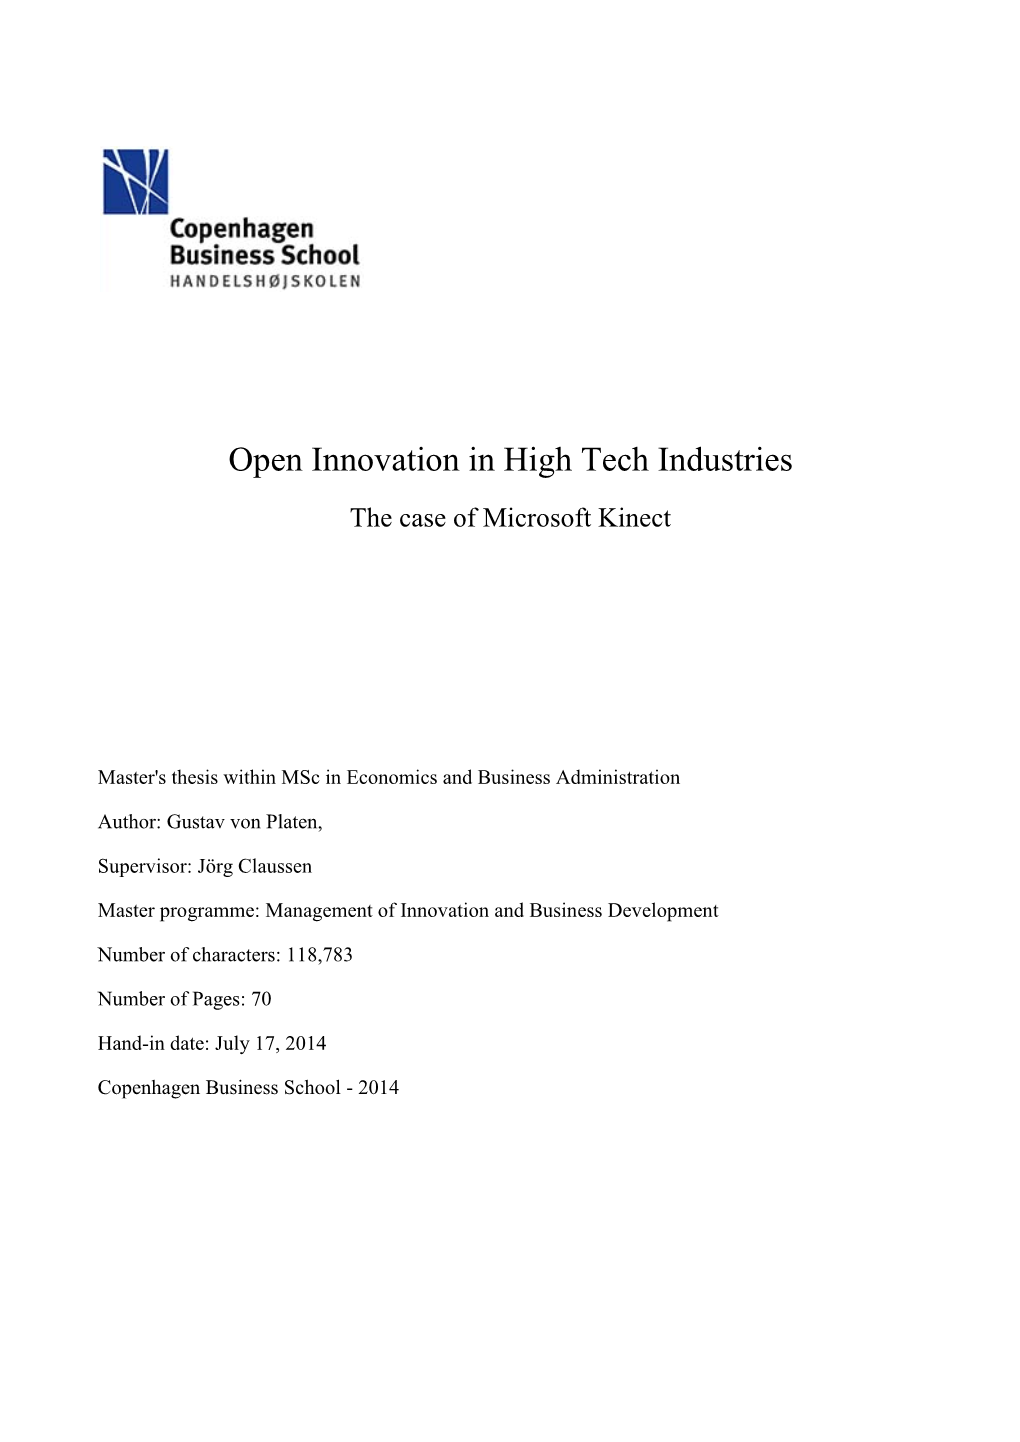 Open Innovation in High Tech Industries the Case of Microsoft Kinect